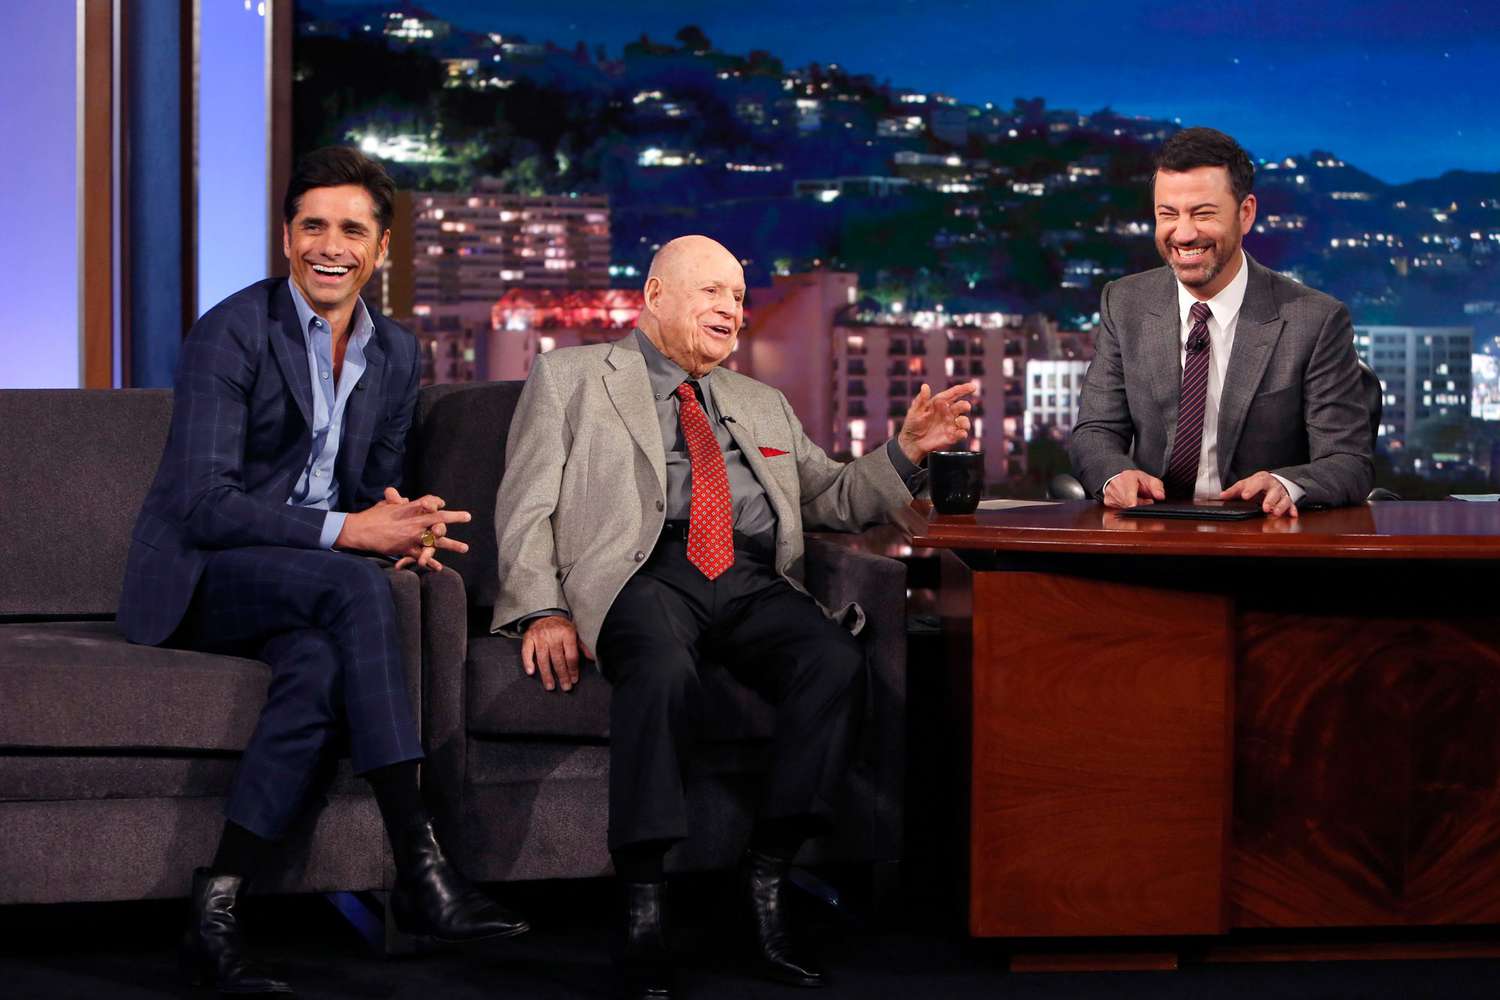 Don Rickles With&nbsp;Jimmy Kimmel and&nbsp;John Stamos on&nbsp;Jimmy Kimmel Live&nbsp;on&nbsp;October 10, 2016